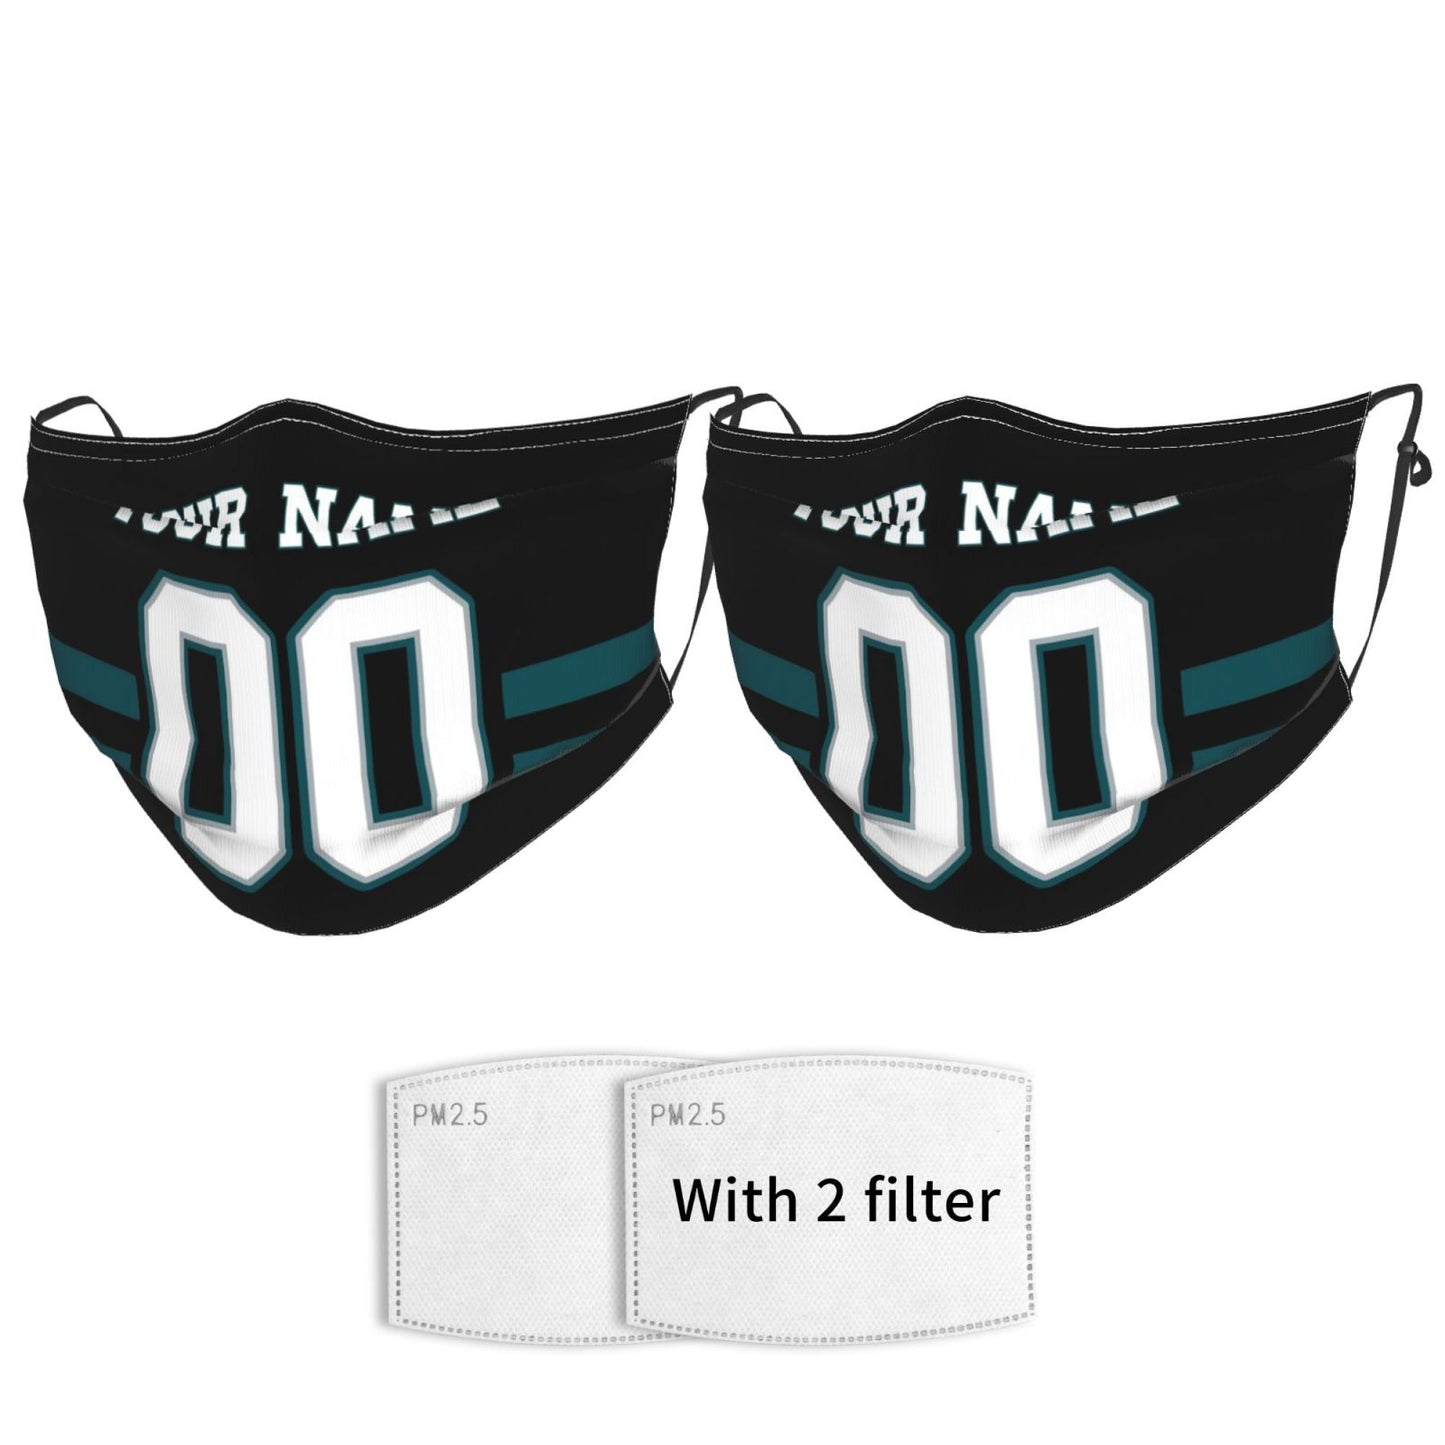 2-Pack Philadelphia Eagles Face Covering Football Team Decorative Adult Face Mask With Filters PM 2.5 Black